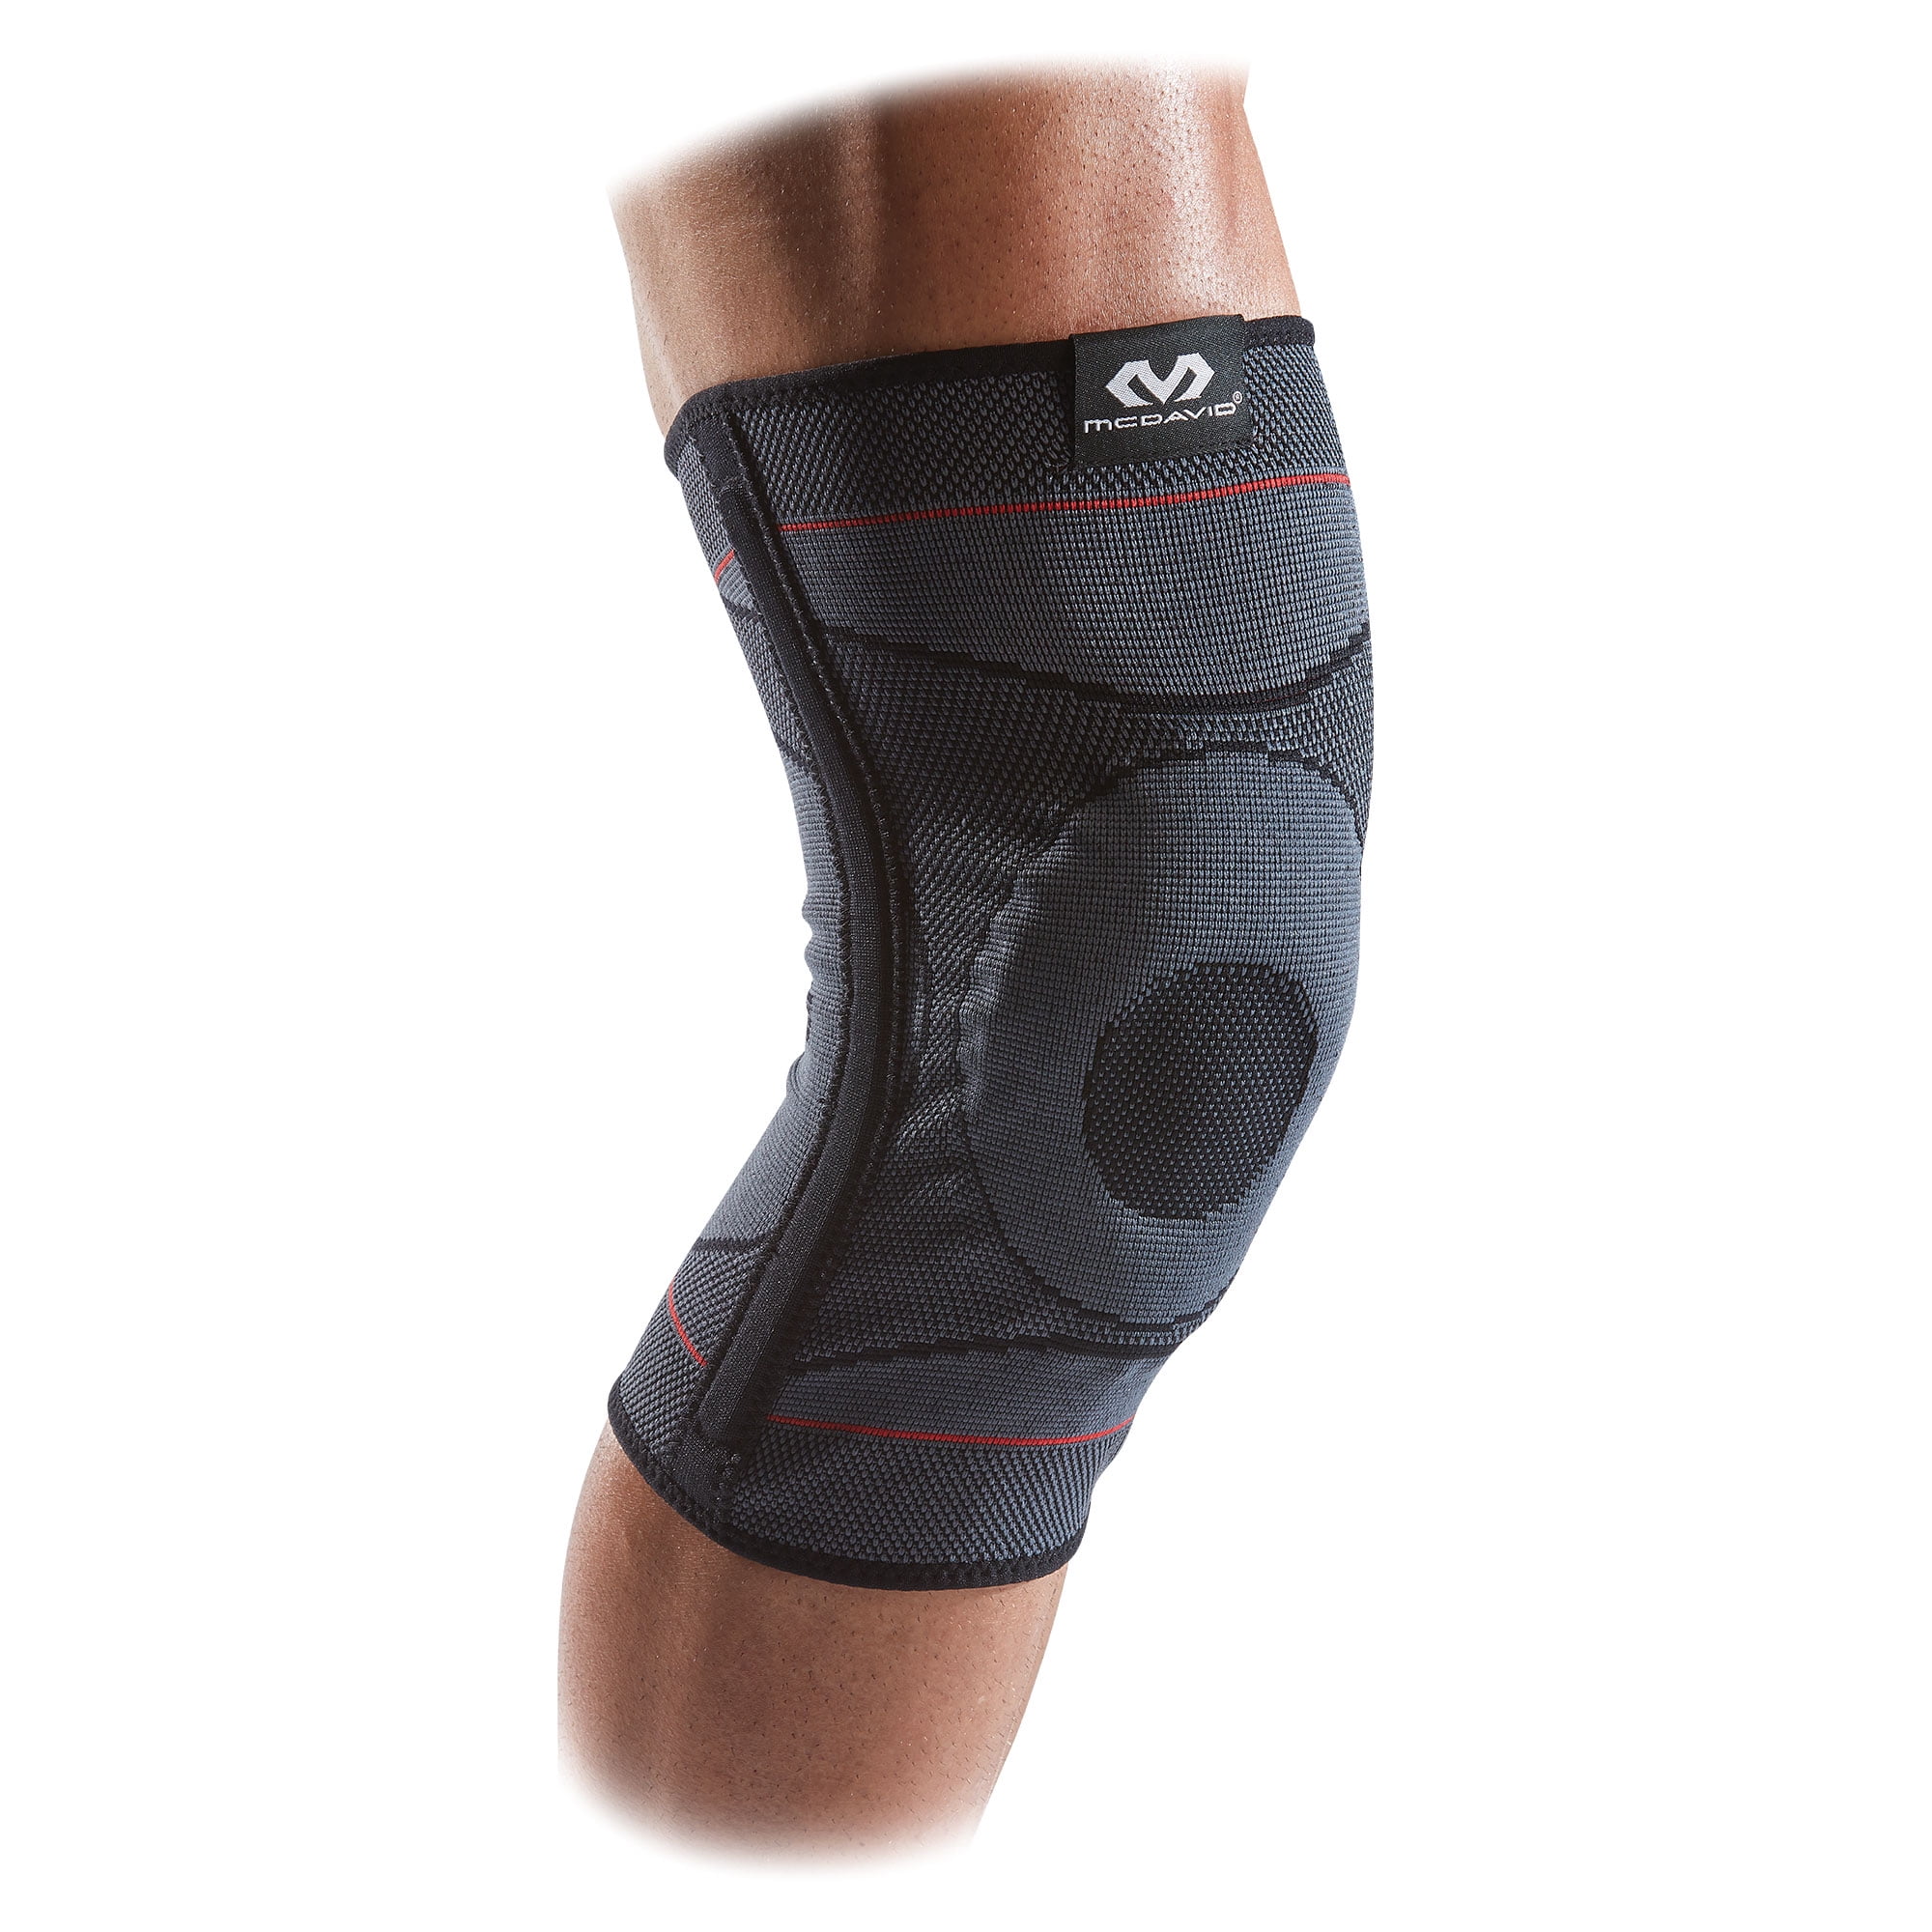 McDavid Knee Compression Knit Sleeve W/ Gel Buttress and Stays, S/M